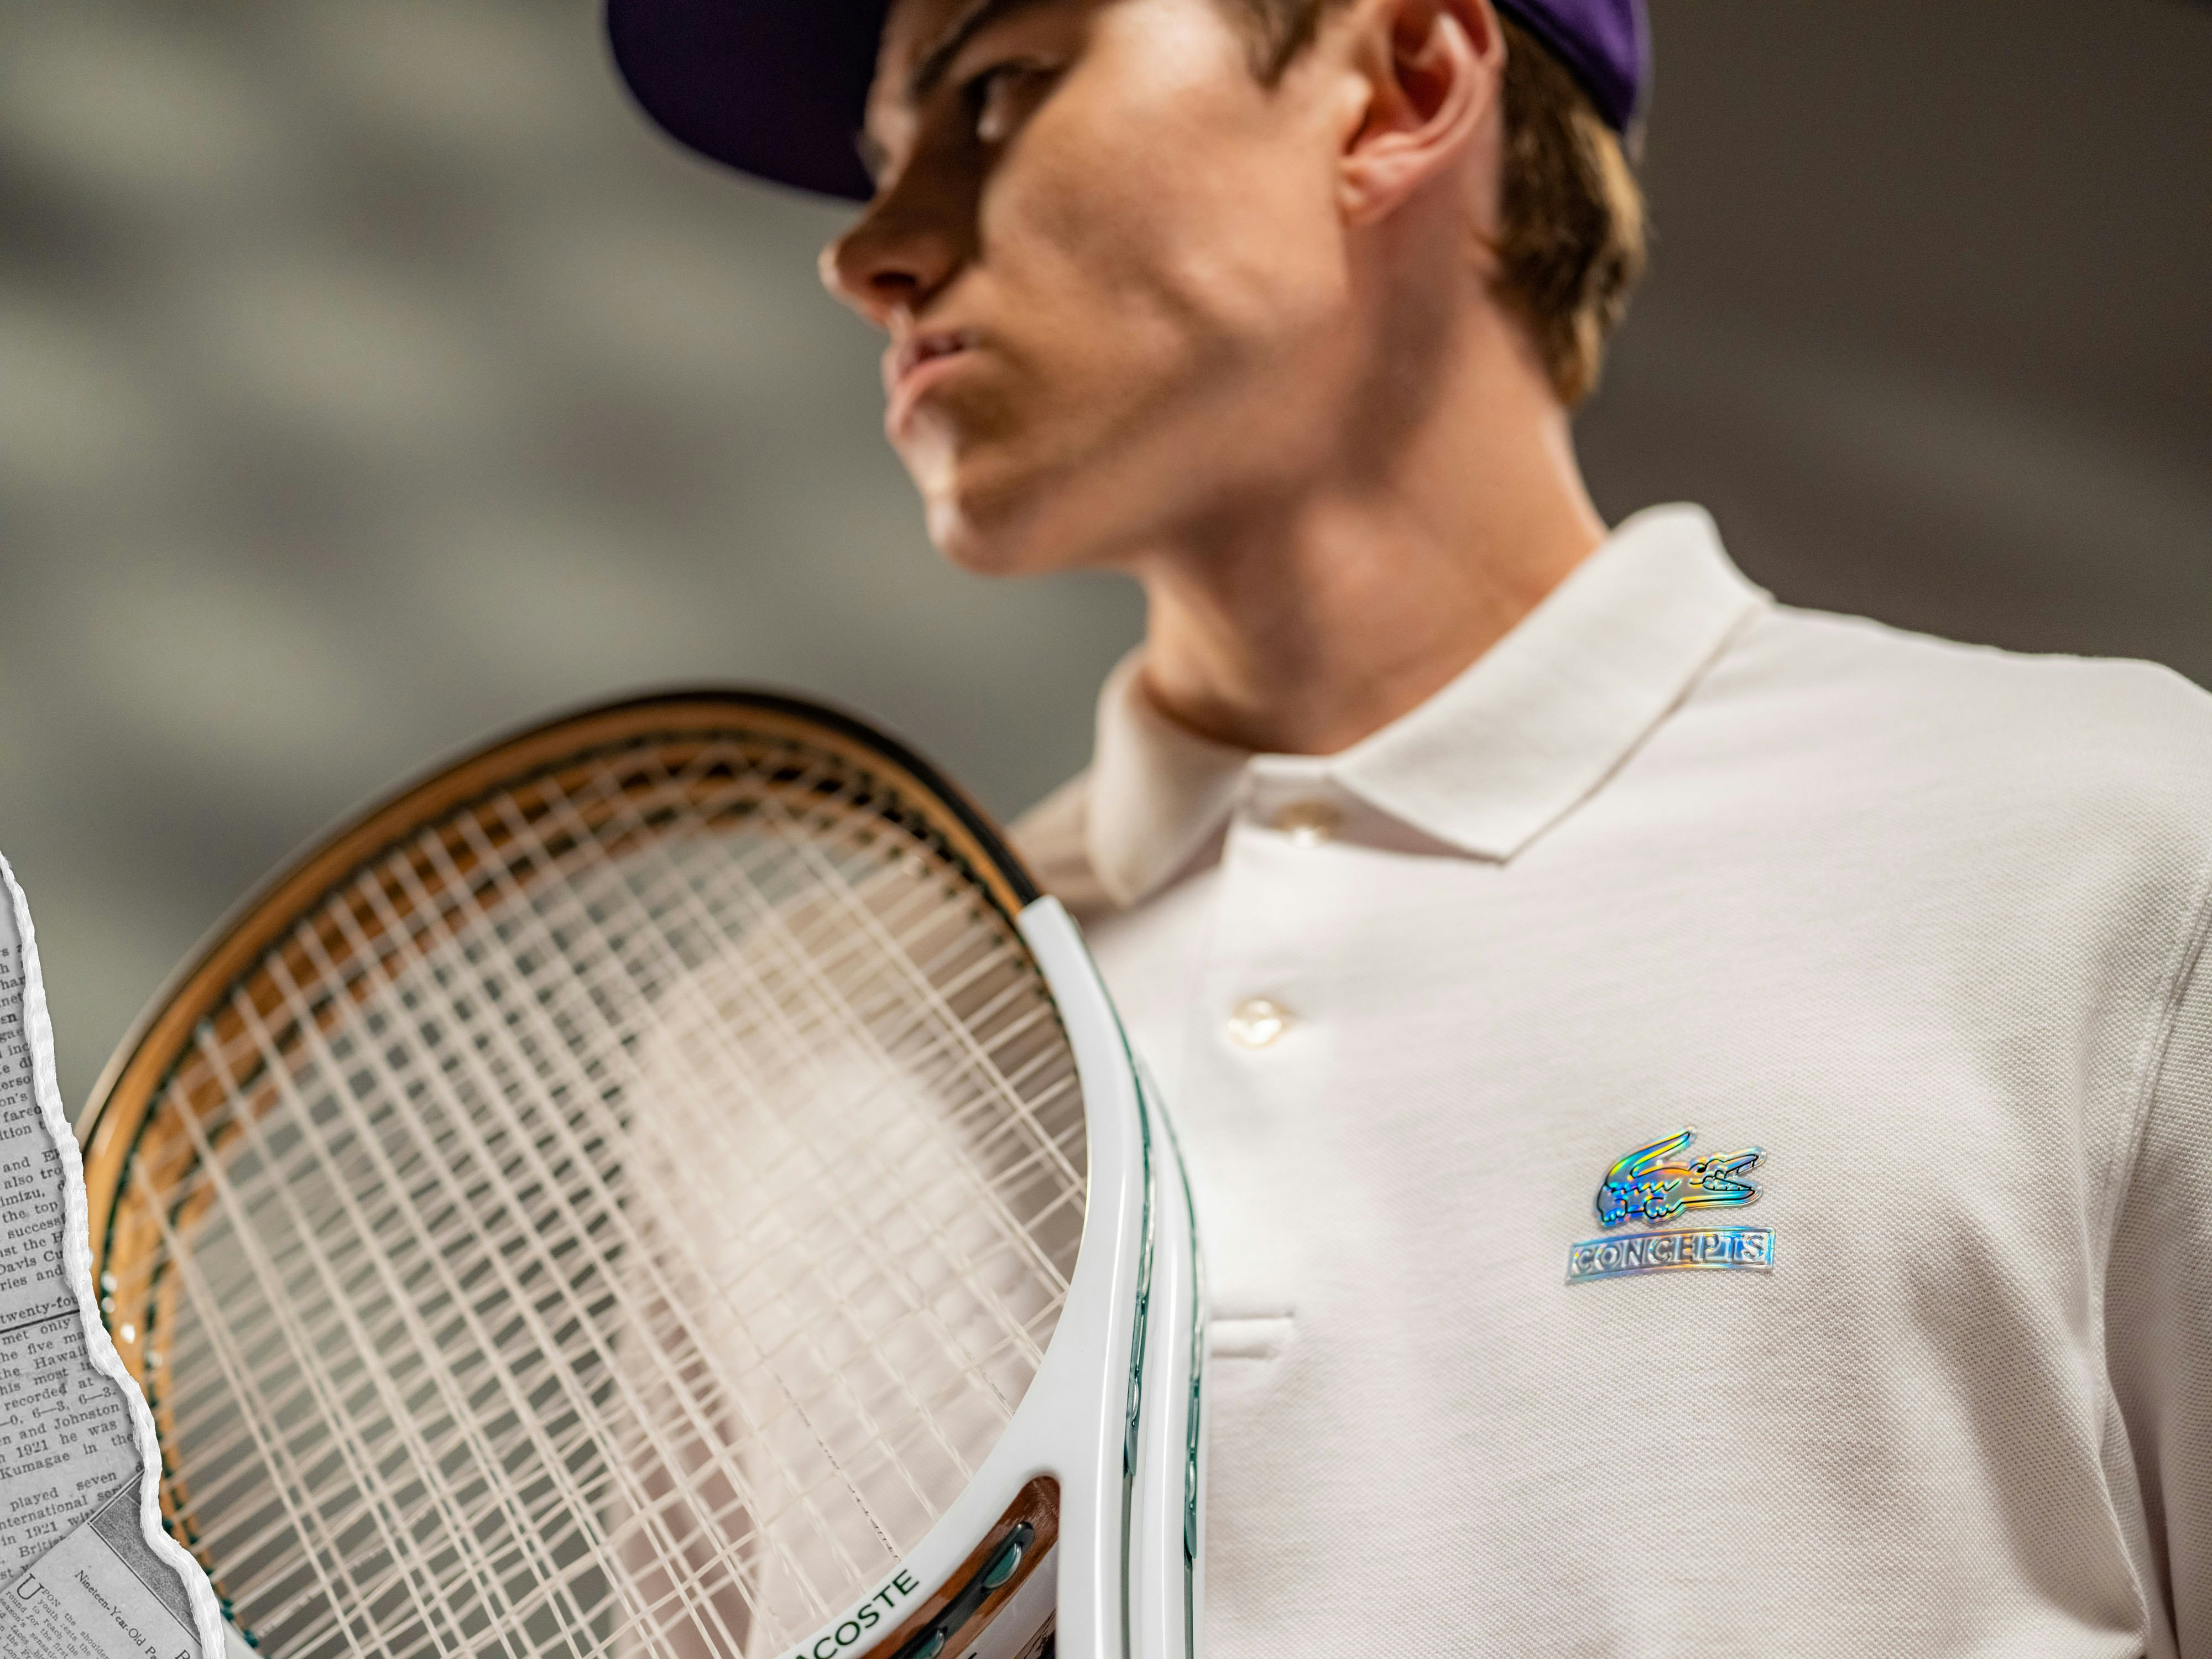 lacoste tennis collection